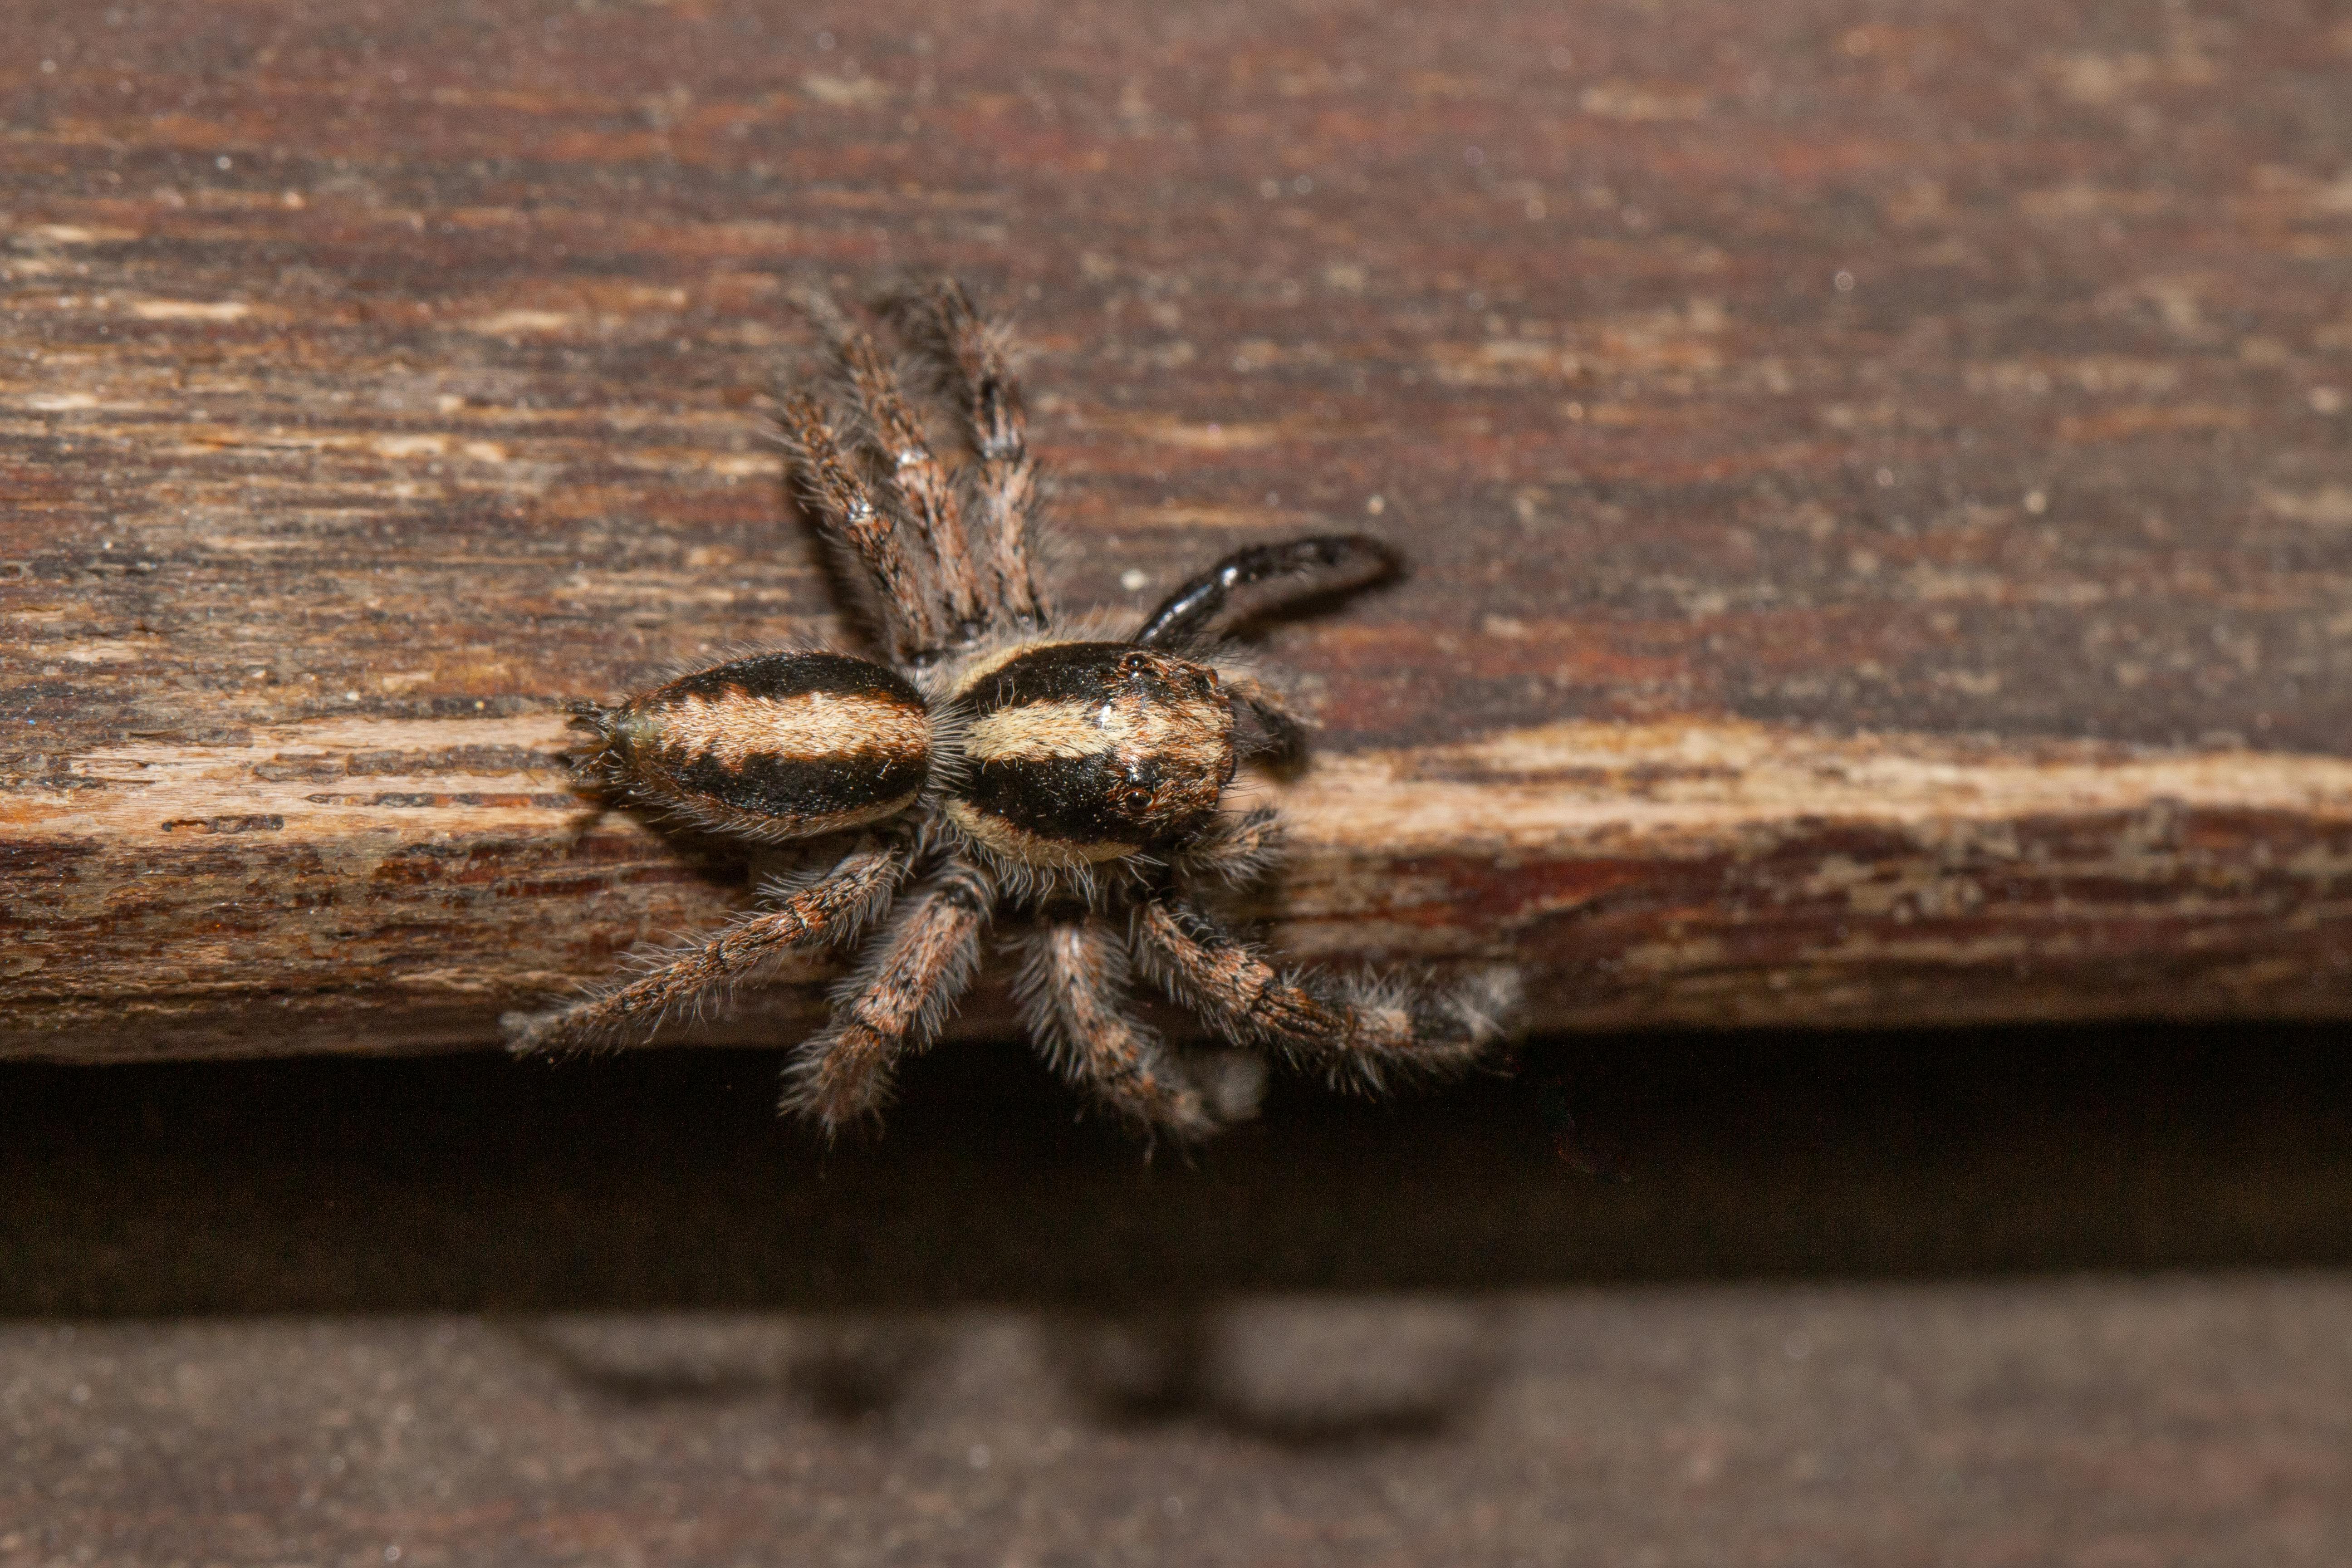 a hairy tarantula spider on a wooden surface